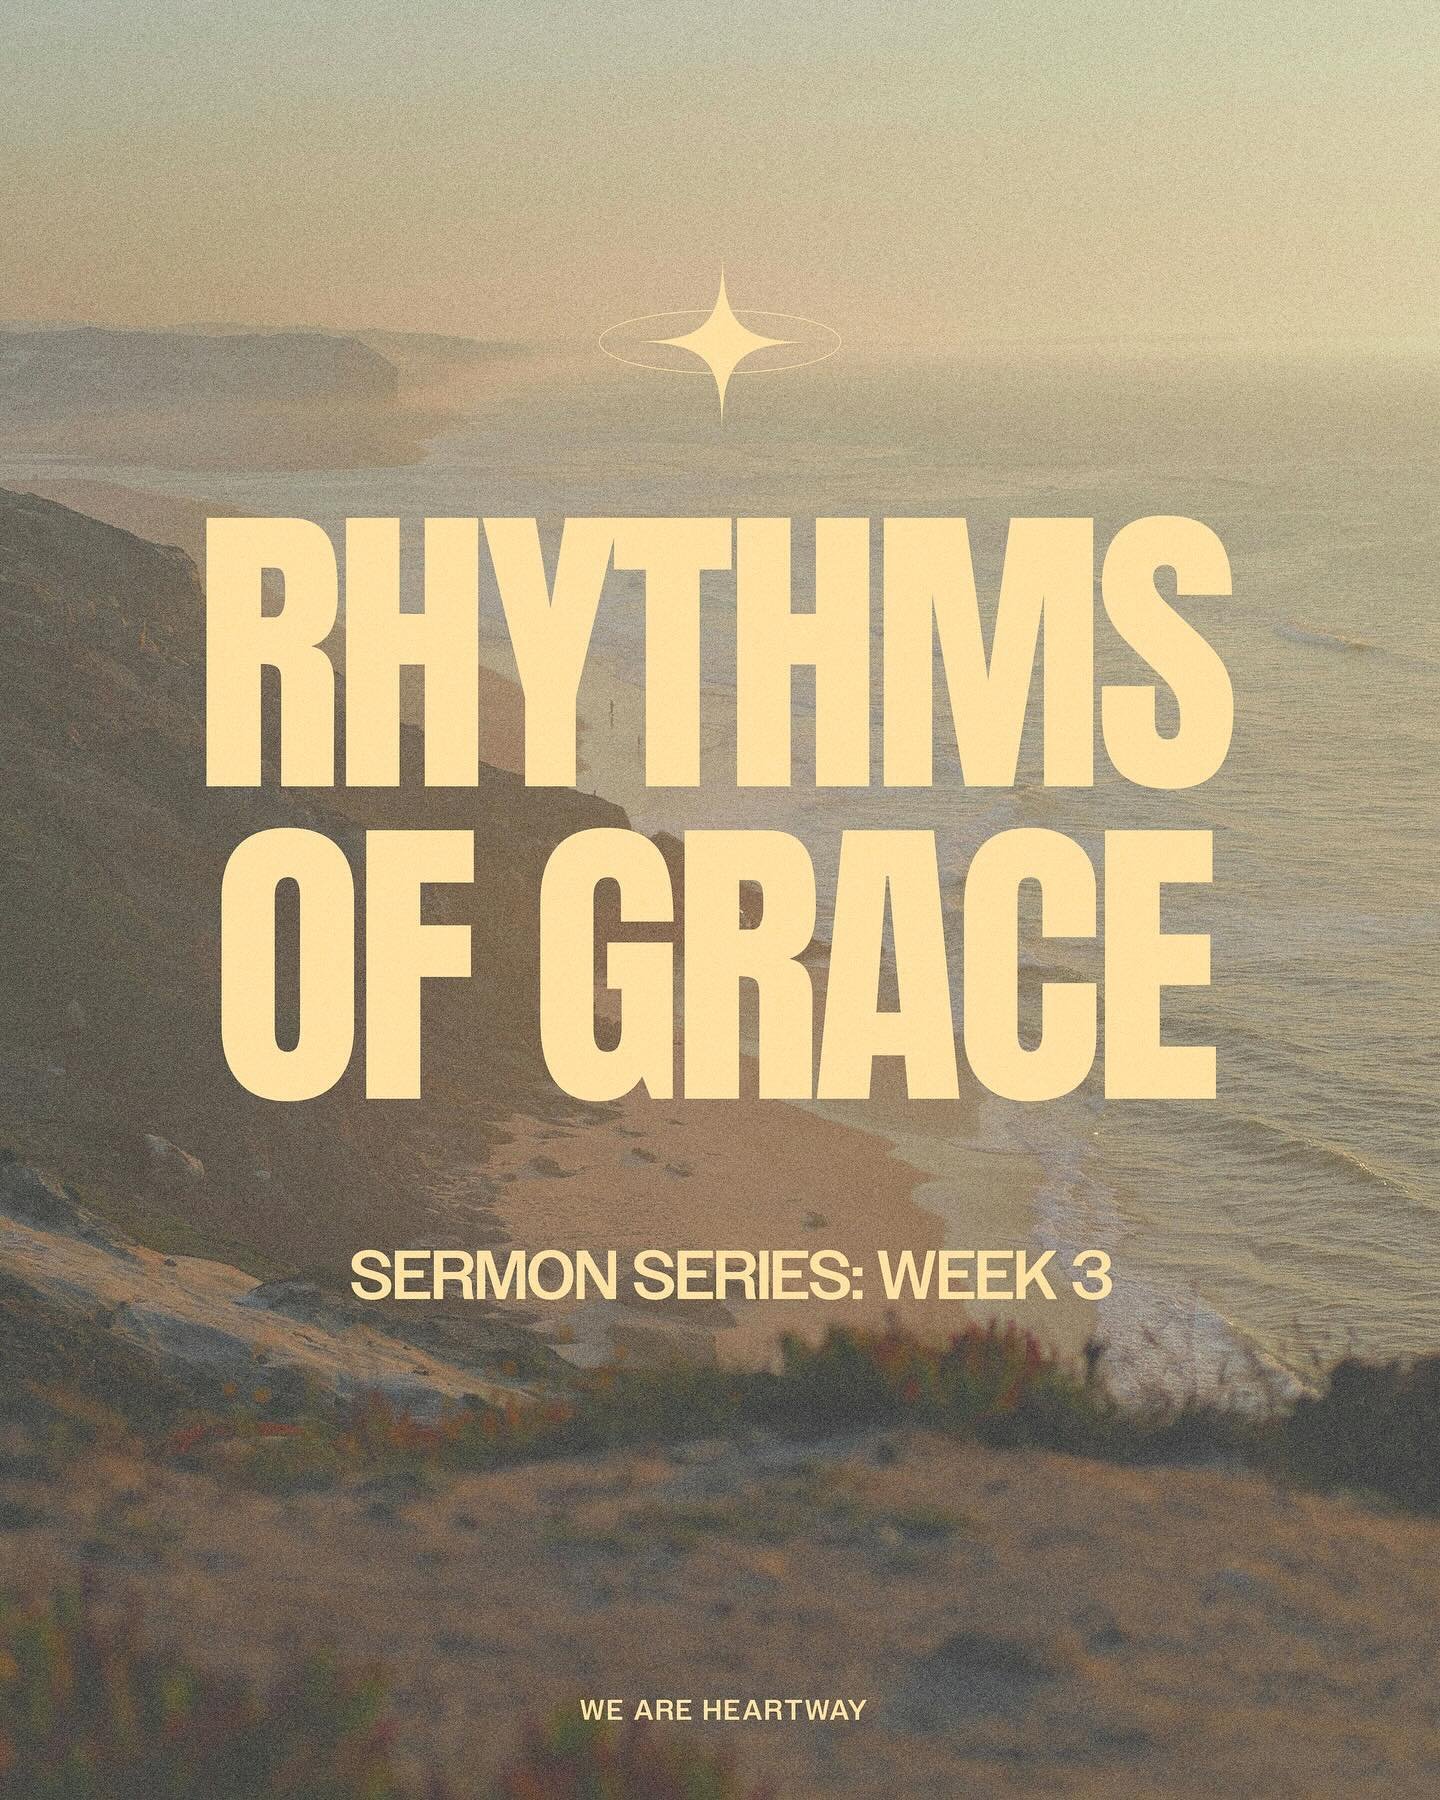 Join us this Sunday for the third week of our sermon series, Rhythms of Grace. There is so much beauty in finding balance and peace in life&rsquo;s rhythms. 

Whether you&rsquo;re seeking solace, community, or simply curious, all are welcome. 🤍

Don